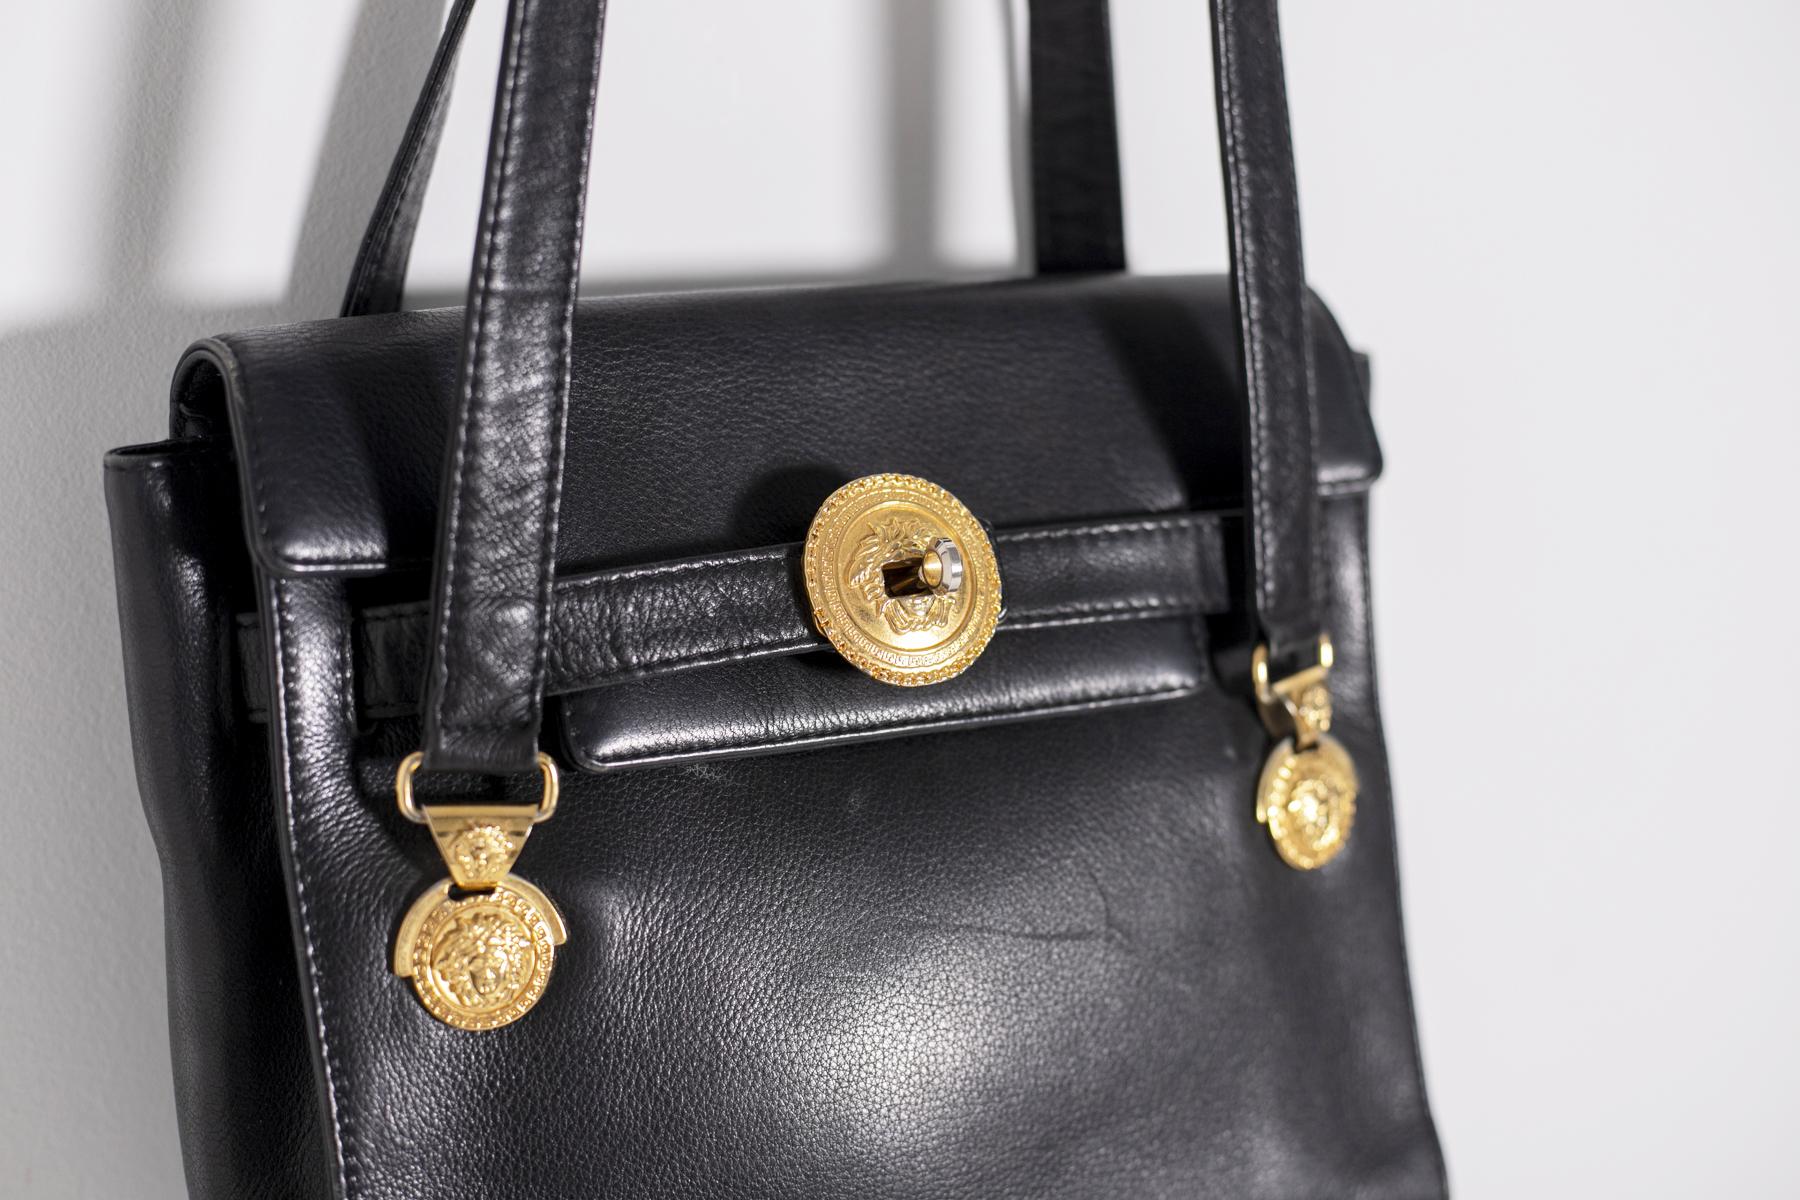 Wonderful Gianni Versace shoulder bag in black leather and golden metal inserts with iconic logo of the goddess Medusa of the famous 